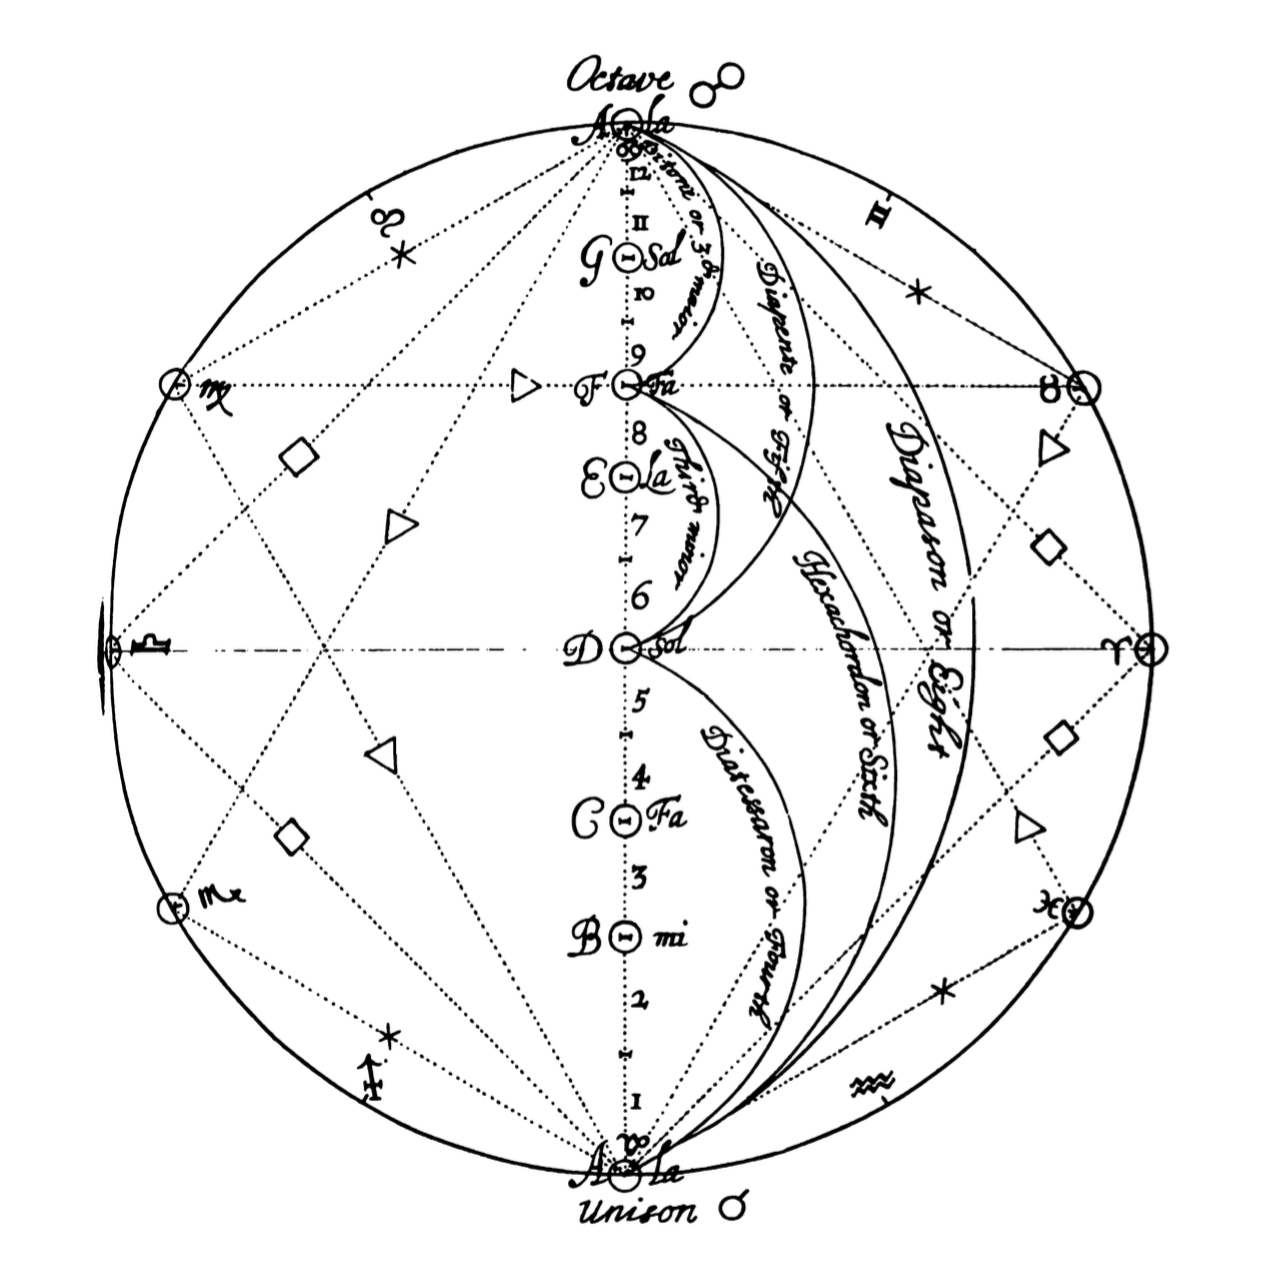 A geometric diagram attempting to show some sort of connection between musical intervals and cosmology